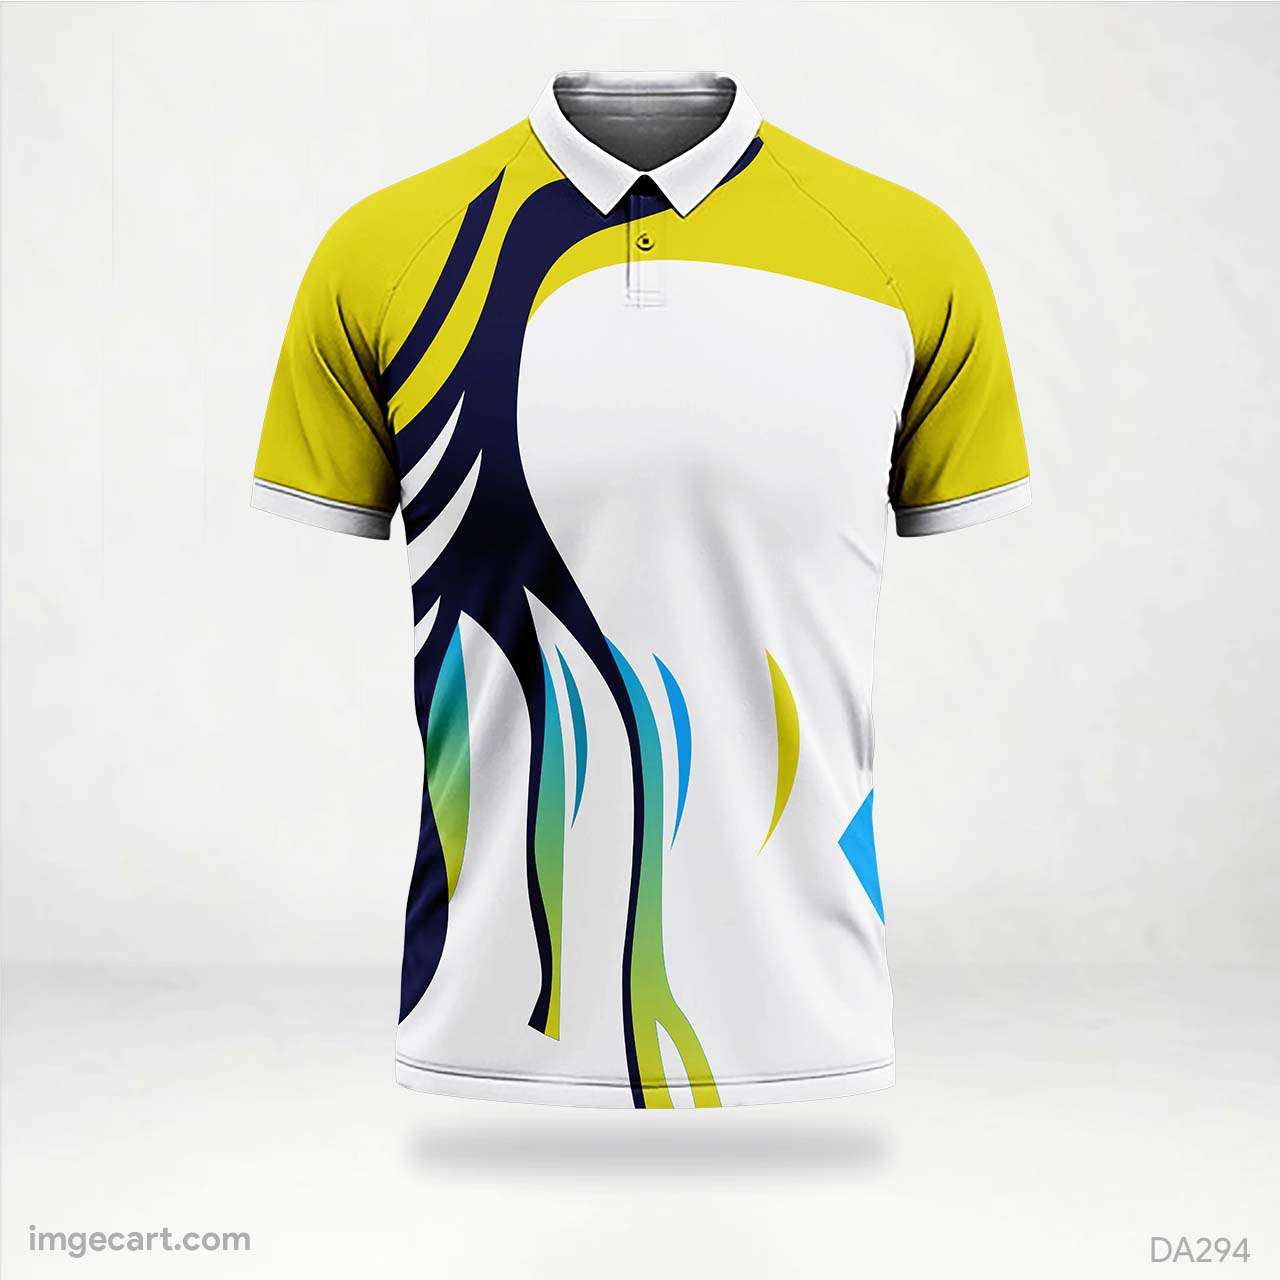 Cricket jersey yellow with blue Pattern - imgecart